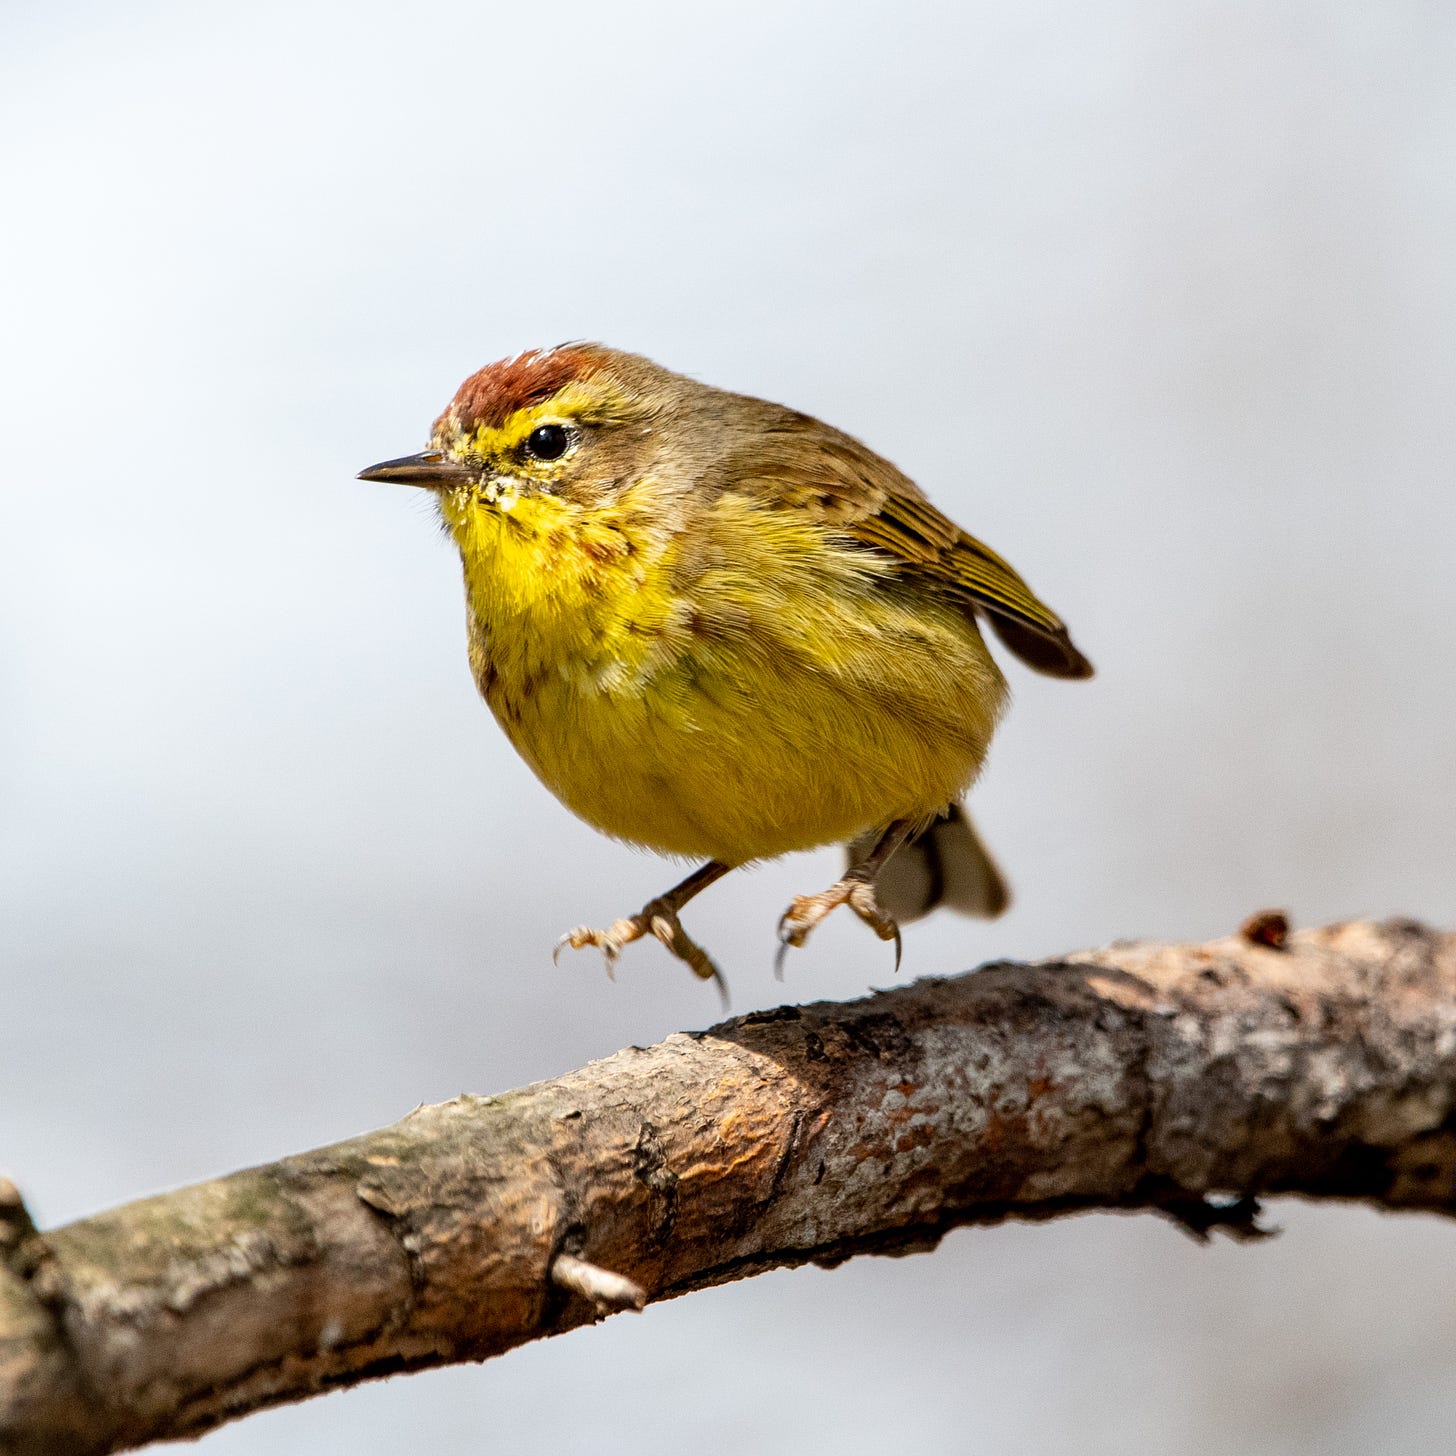 A bright palm warbler in mid-hop, about to land on a branch